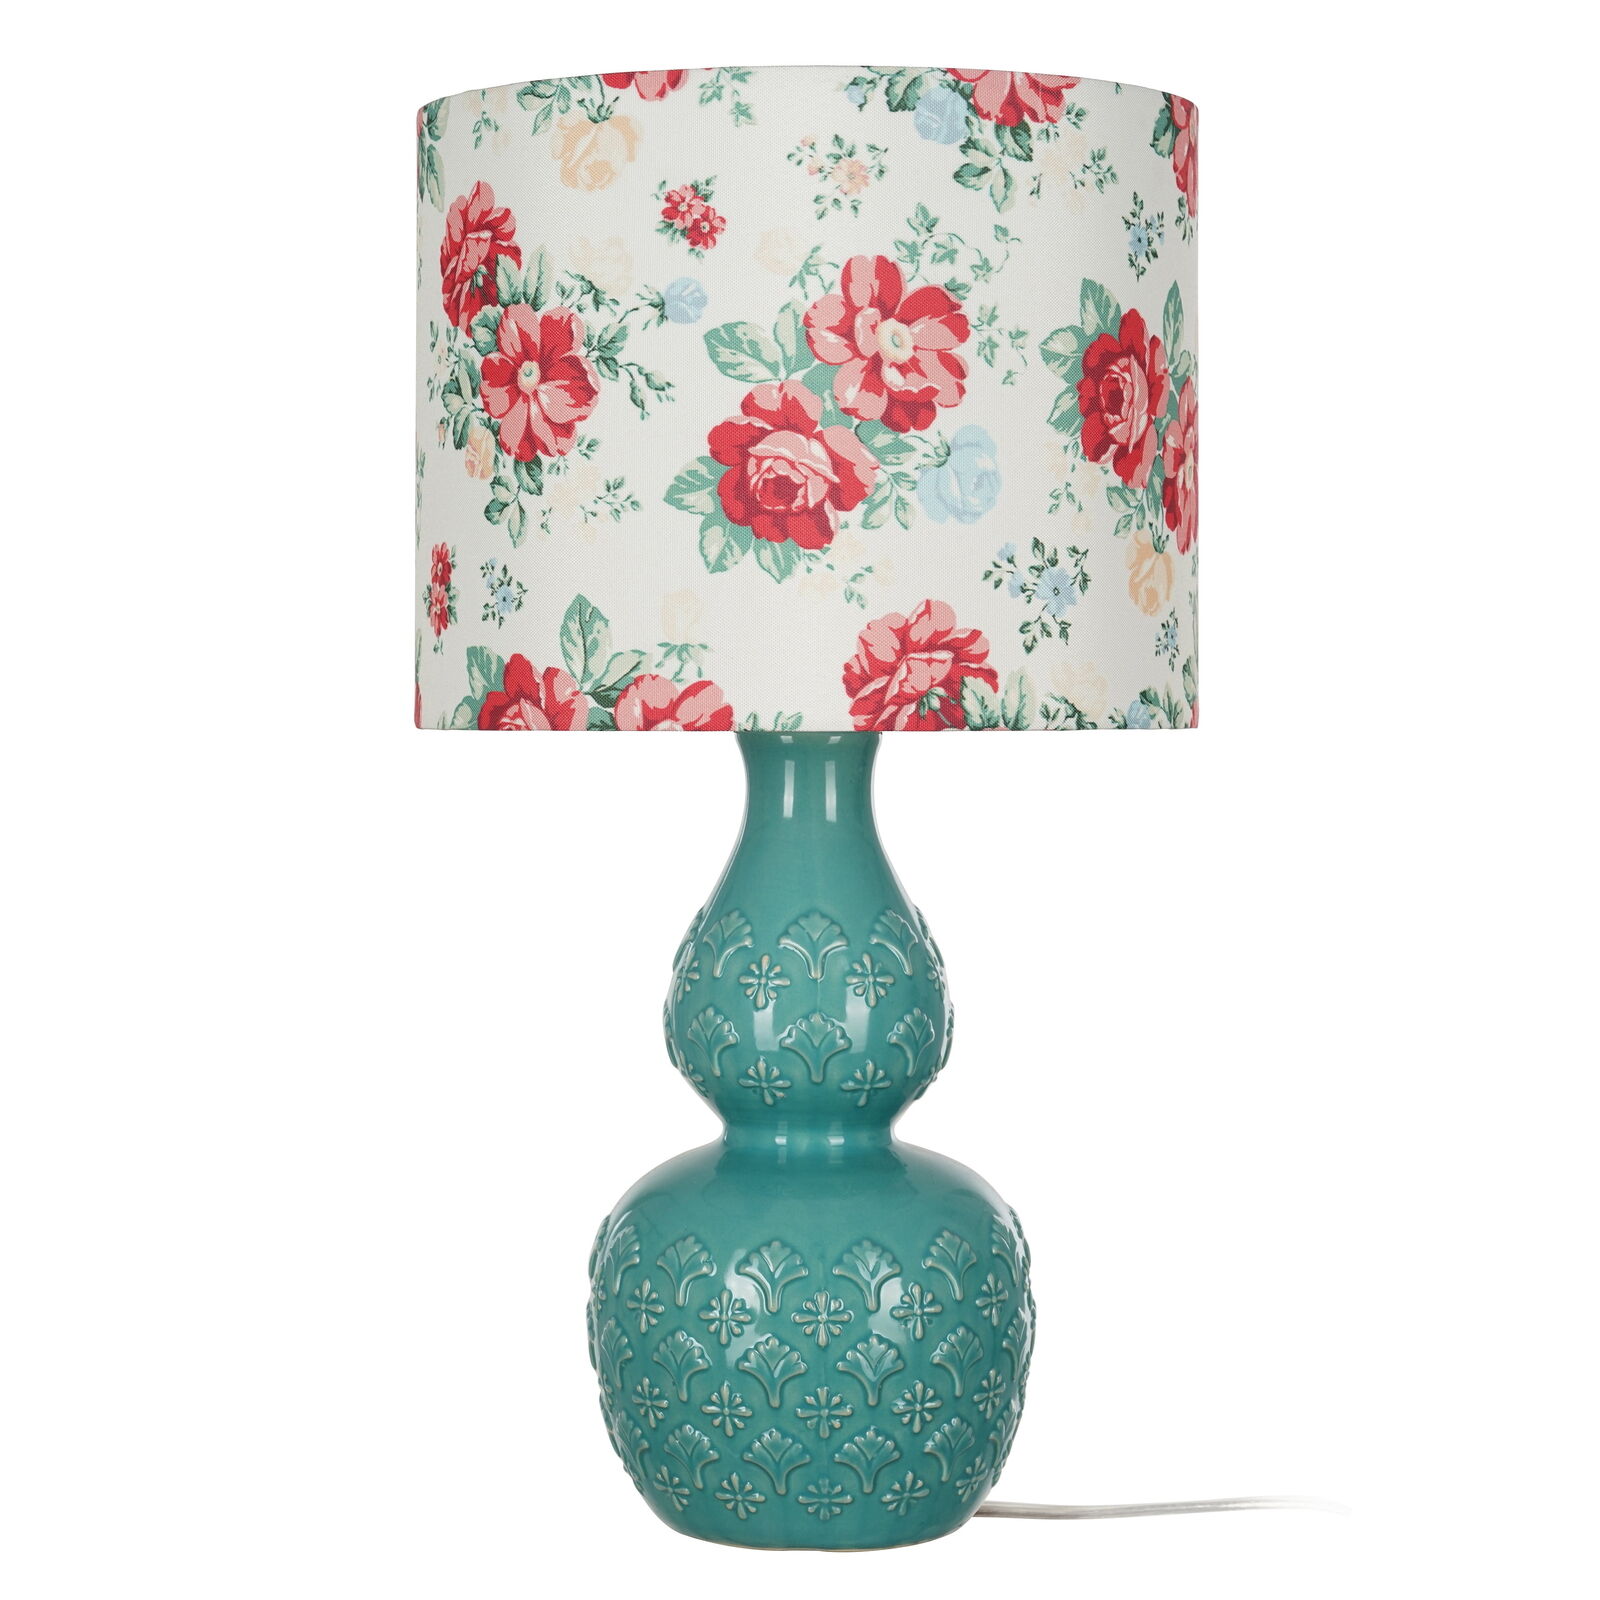 Vintage Floral Table Lamp, Green Finish